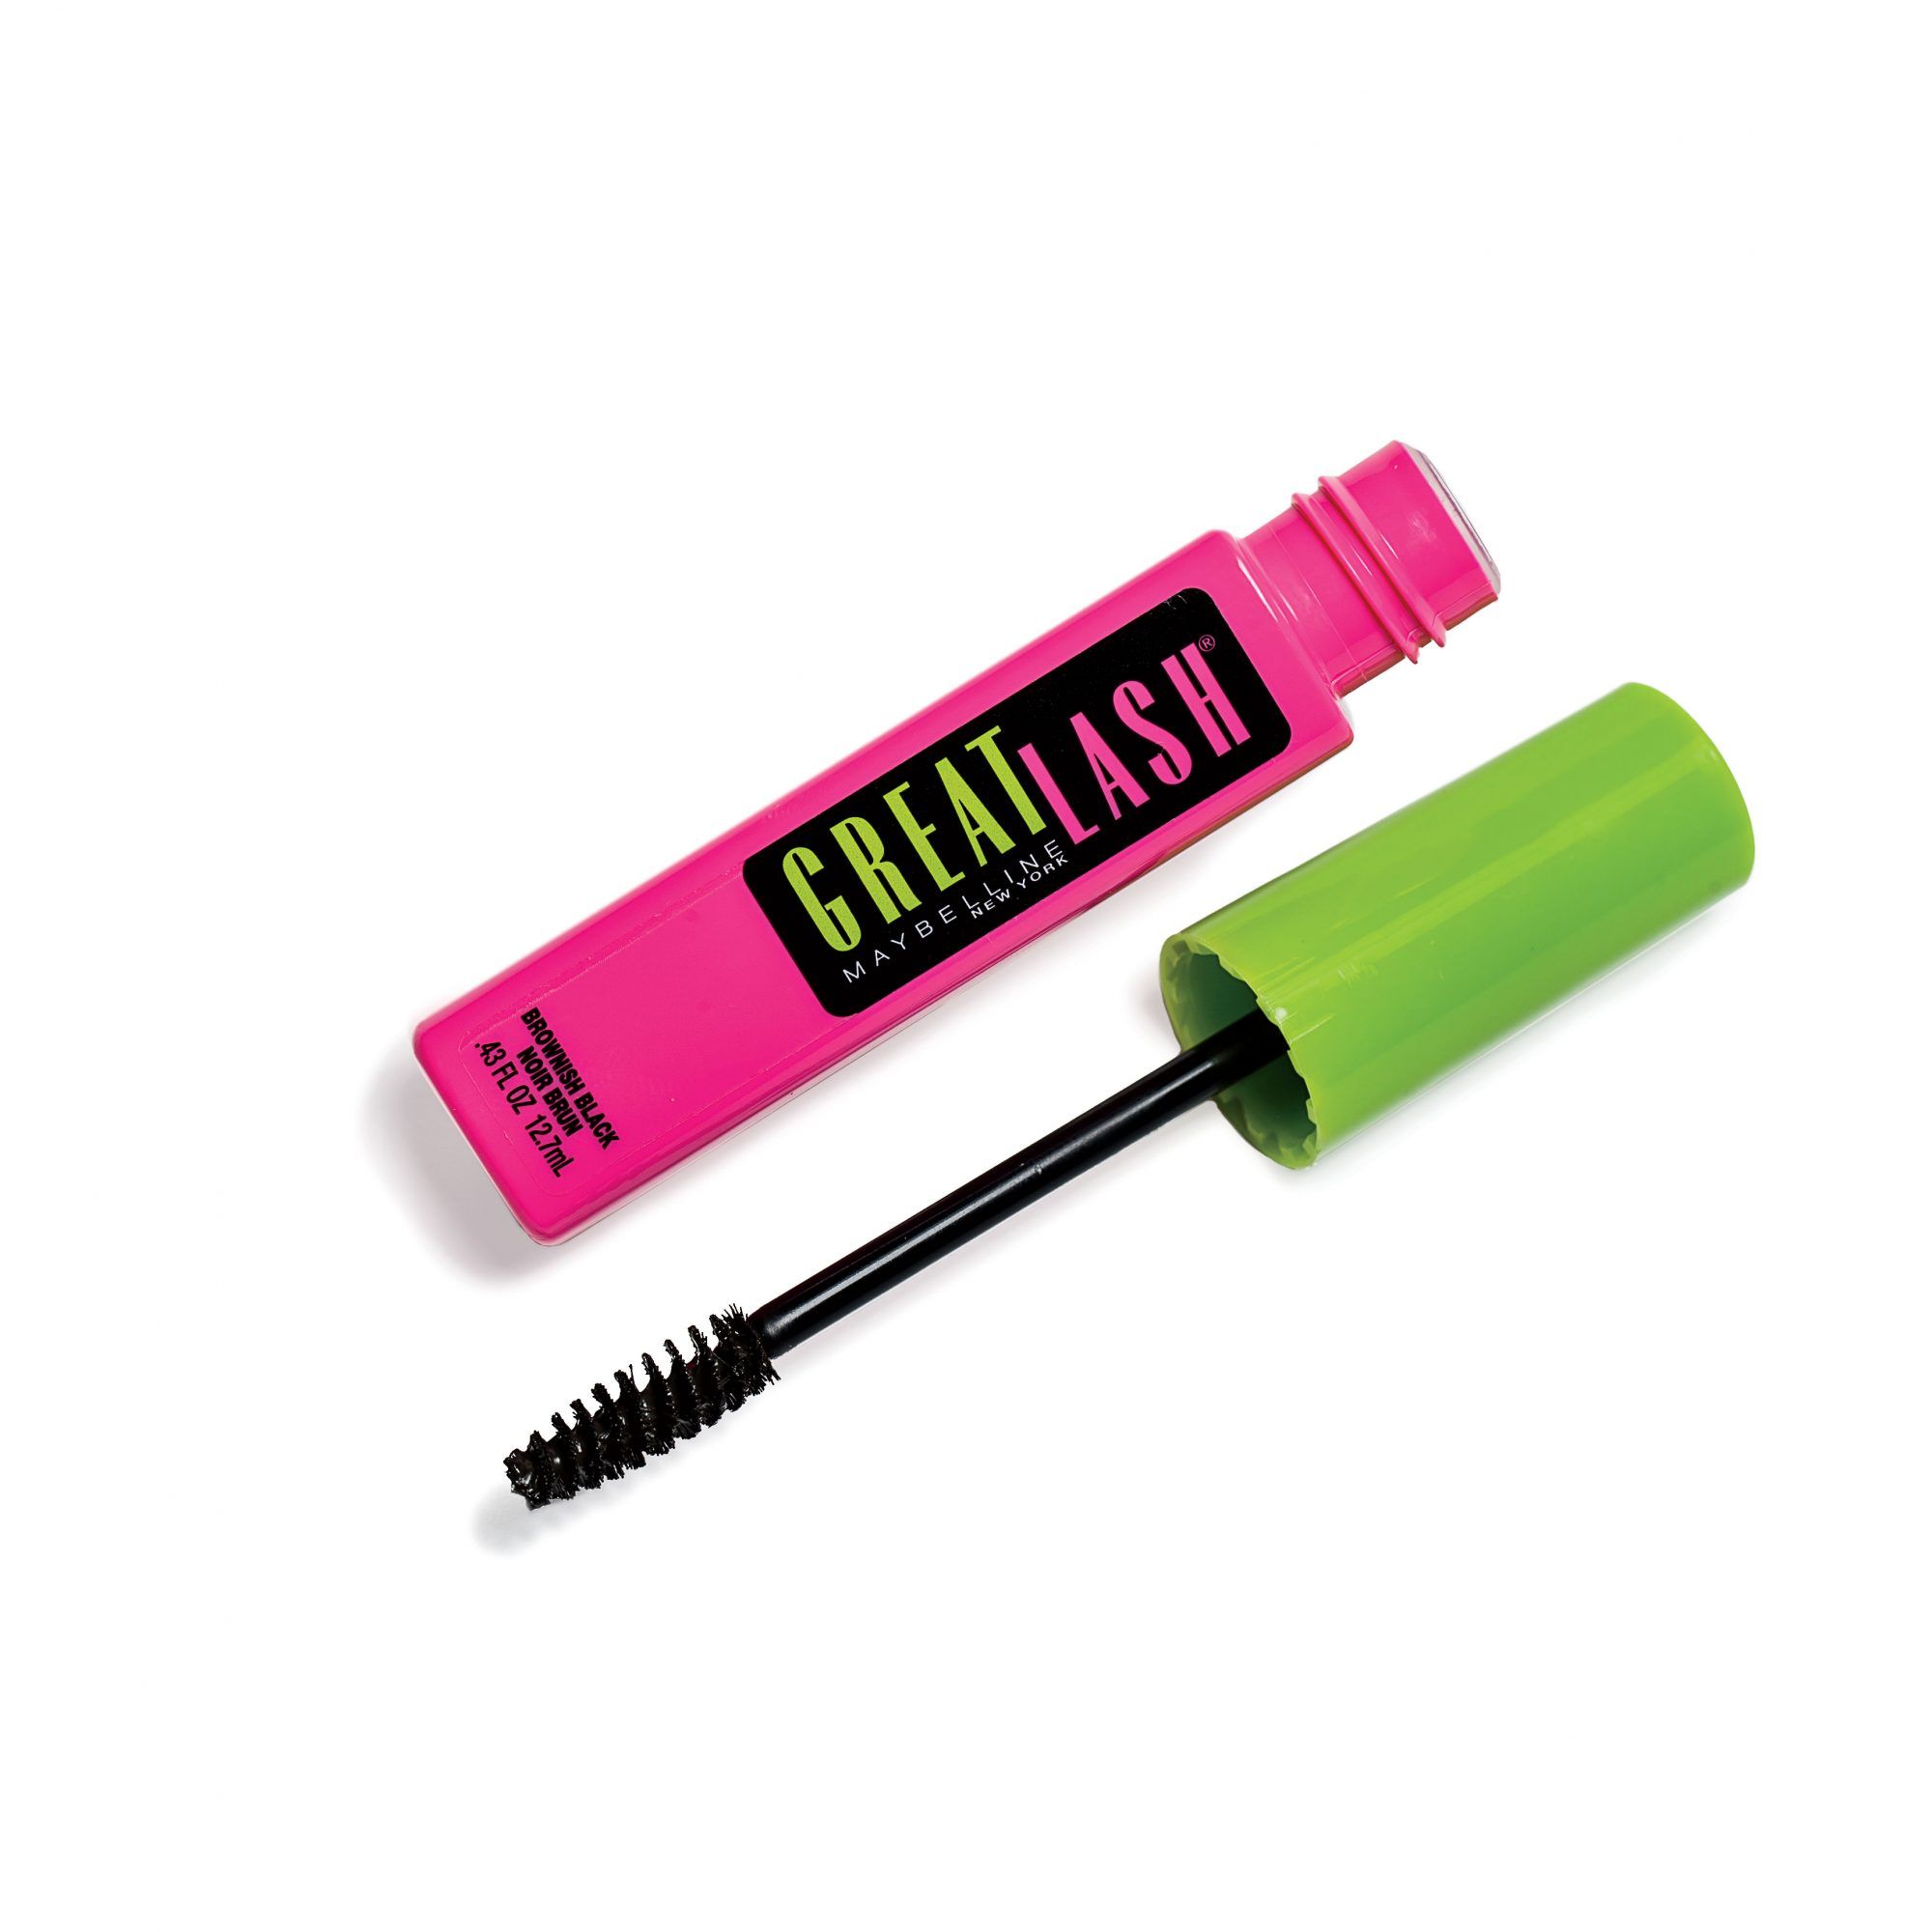 Behind the Icon: Maybelline New Great Lash